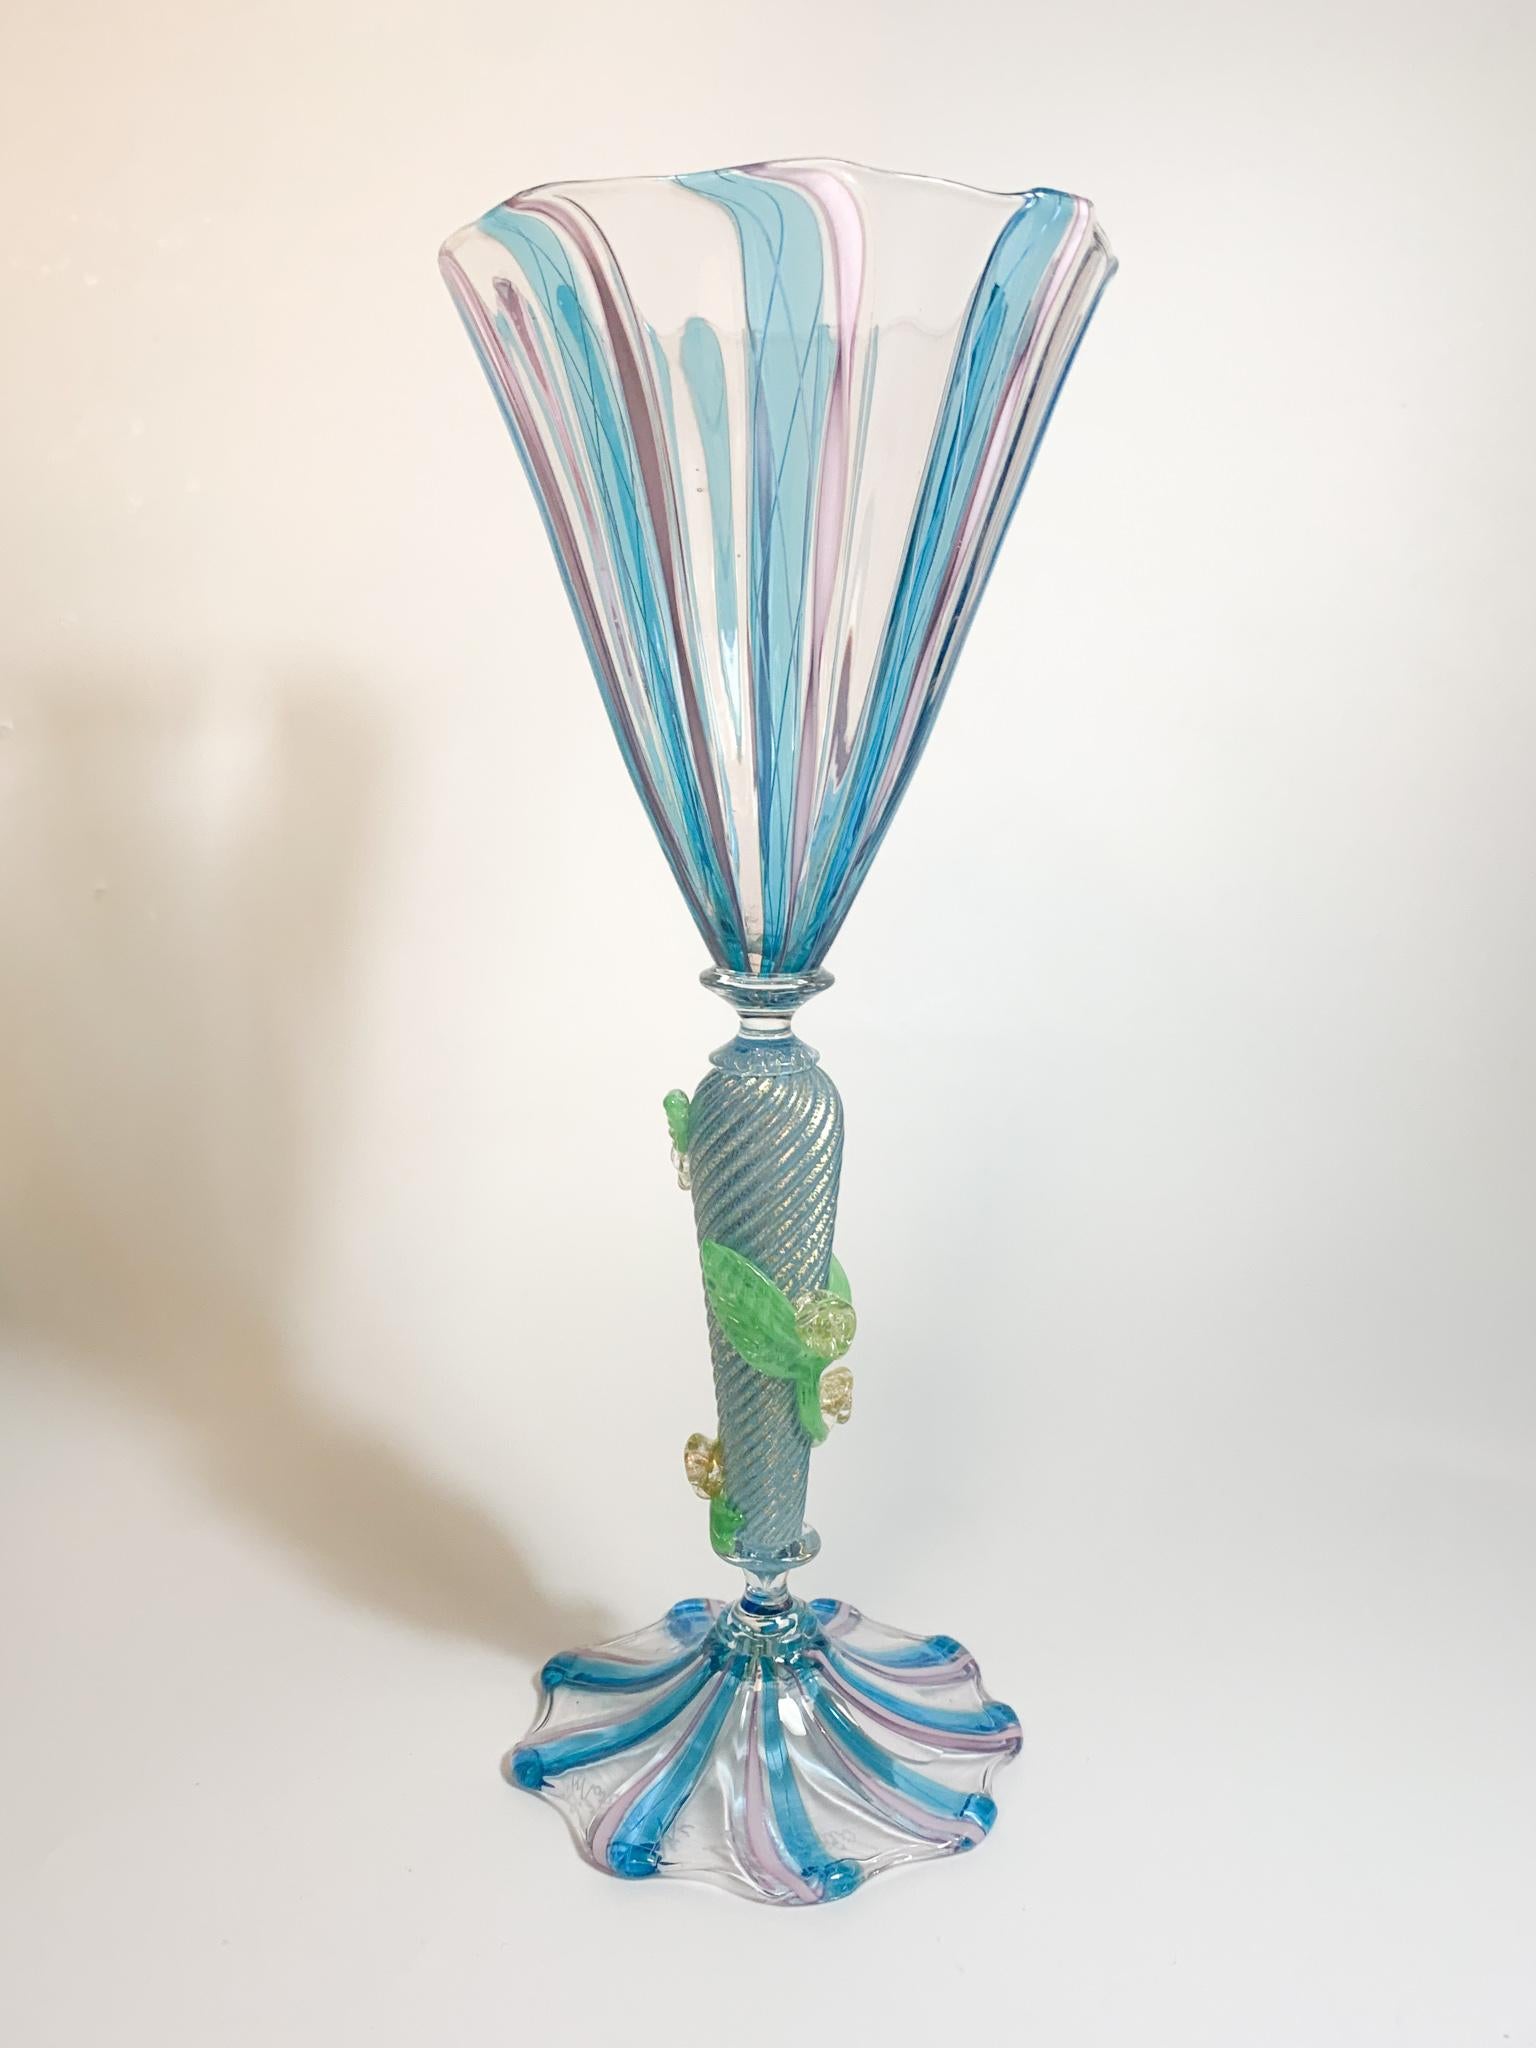 Glass in blue, pink and green Murano glass, with filigree work and roses carved on the stem, made by Marino Santi in the 1950s

Ø 10 cm h 25 cm